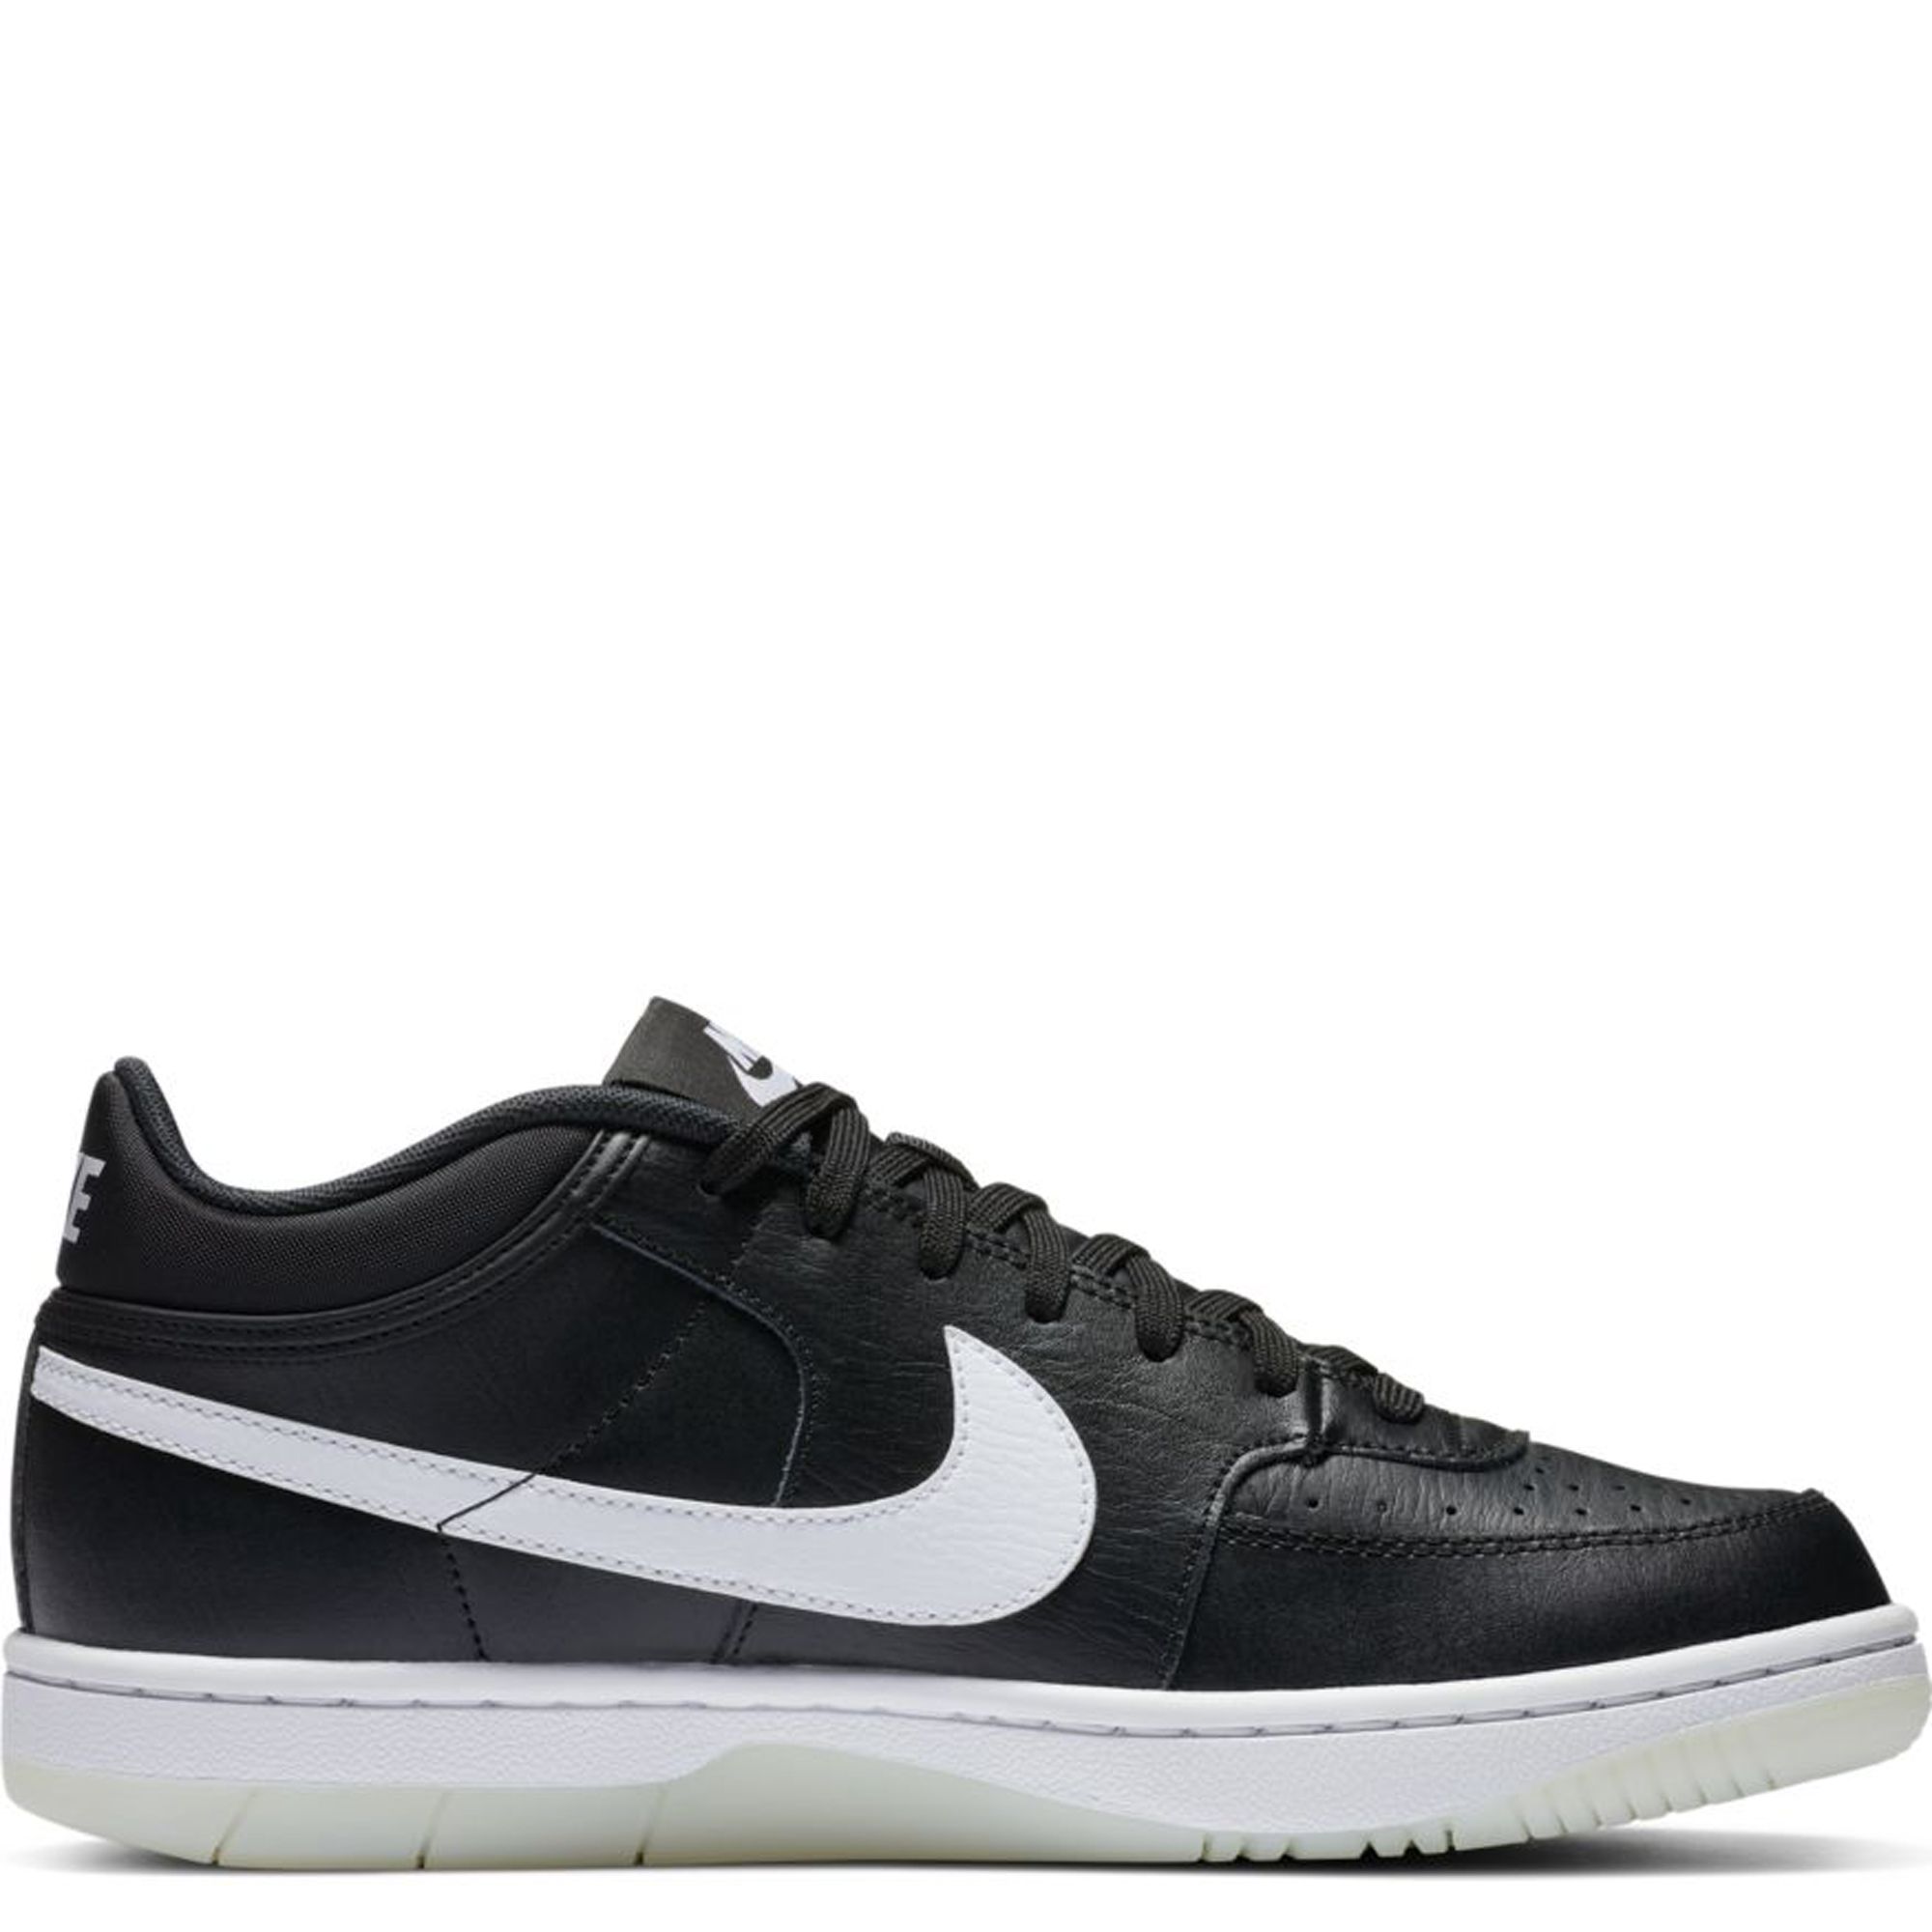  Nike Men's Shoes Sky Force 3/4 Black White CT8448-001  (Numeric_7_Point_5)